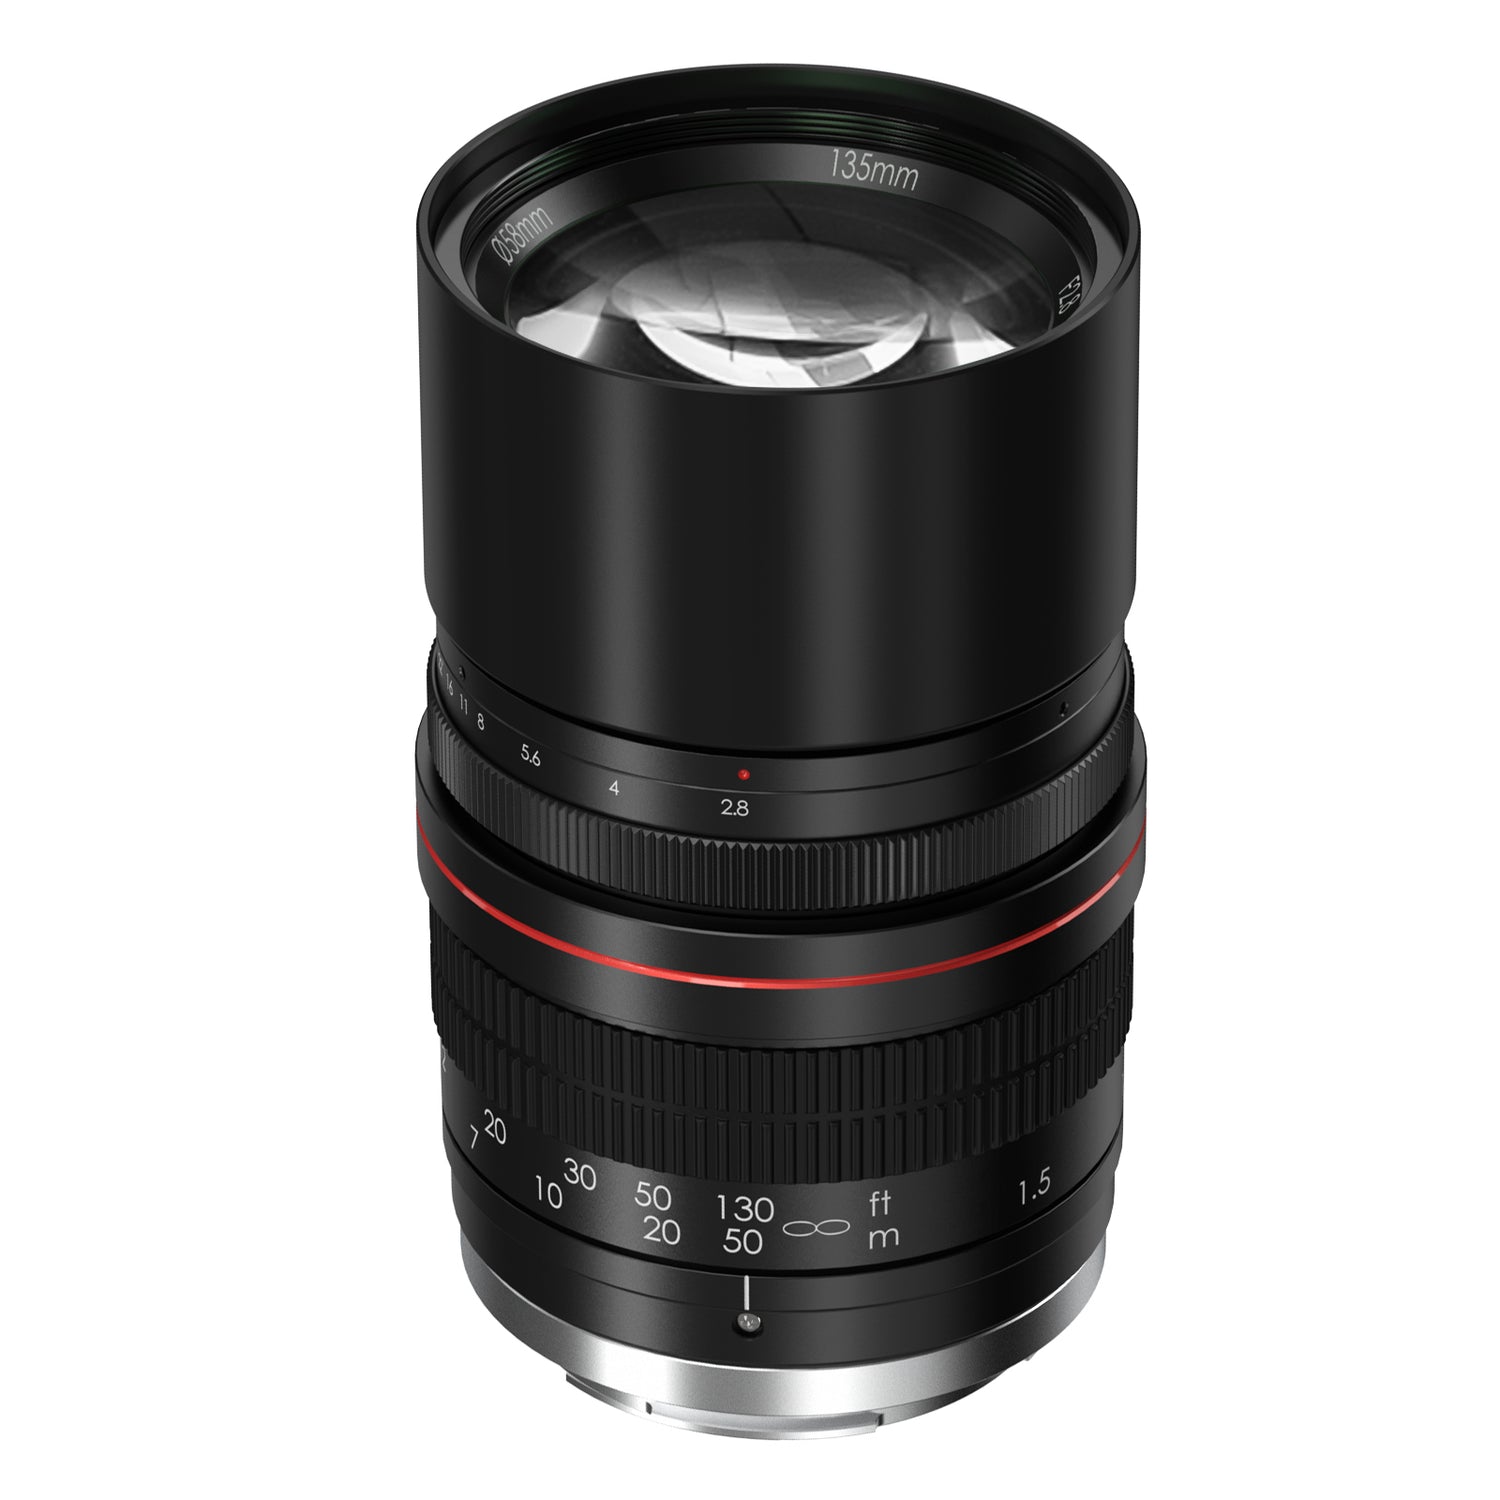 135mm Telephoto Lens Born for Image Quality Performance